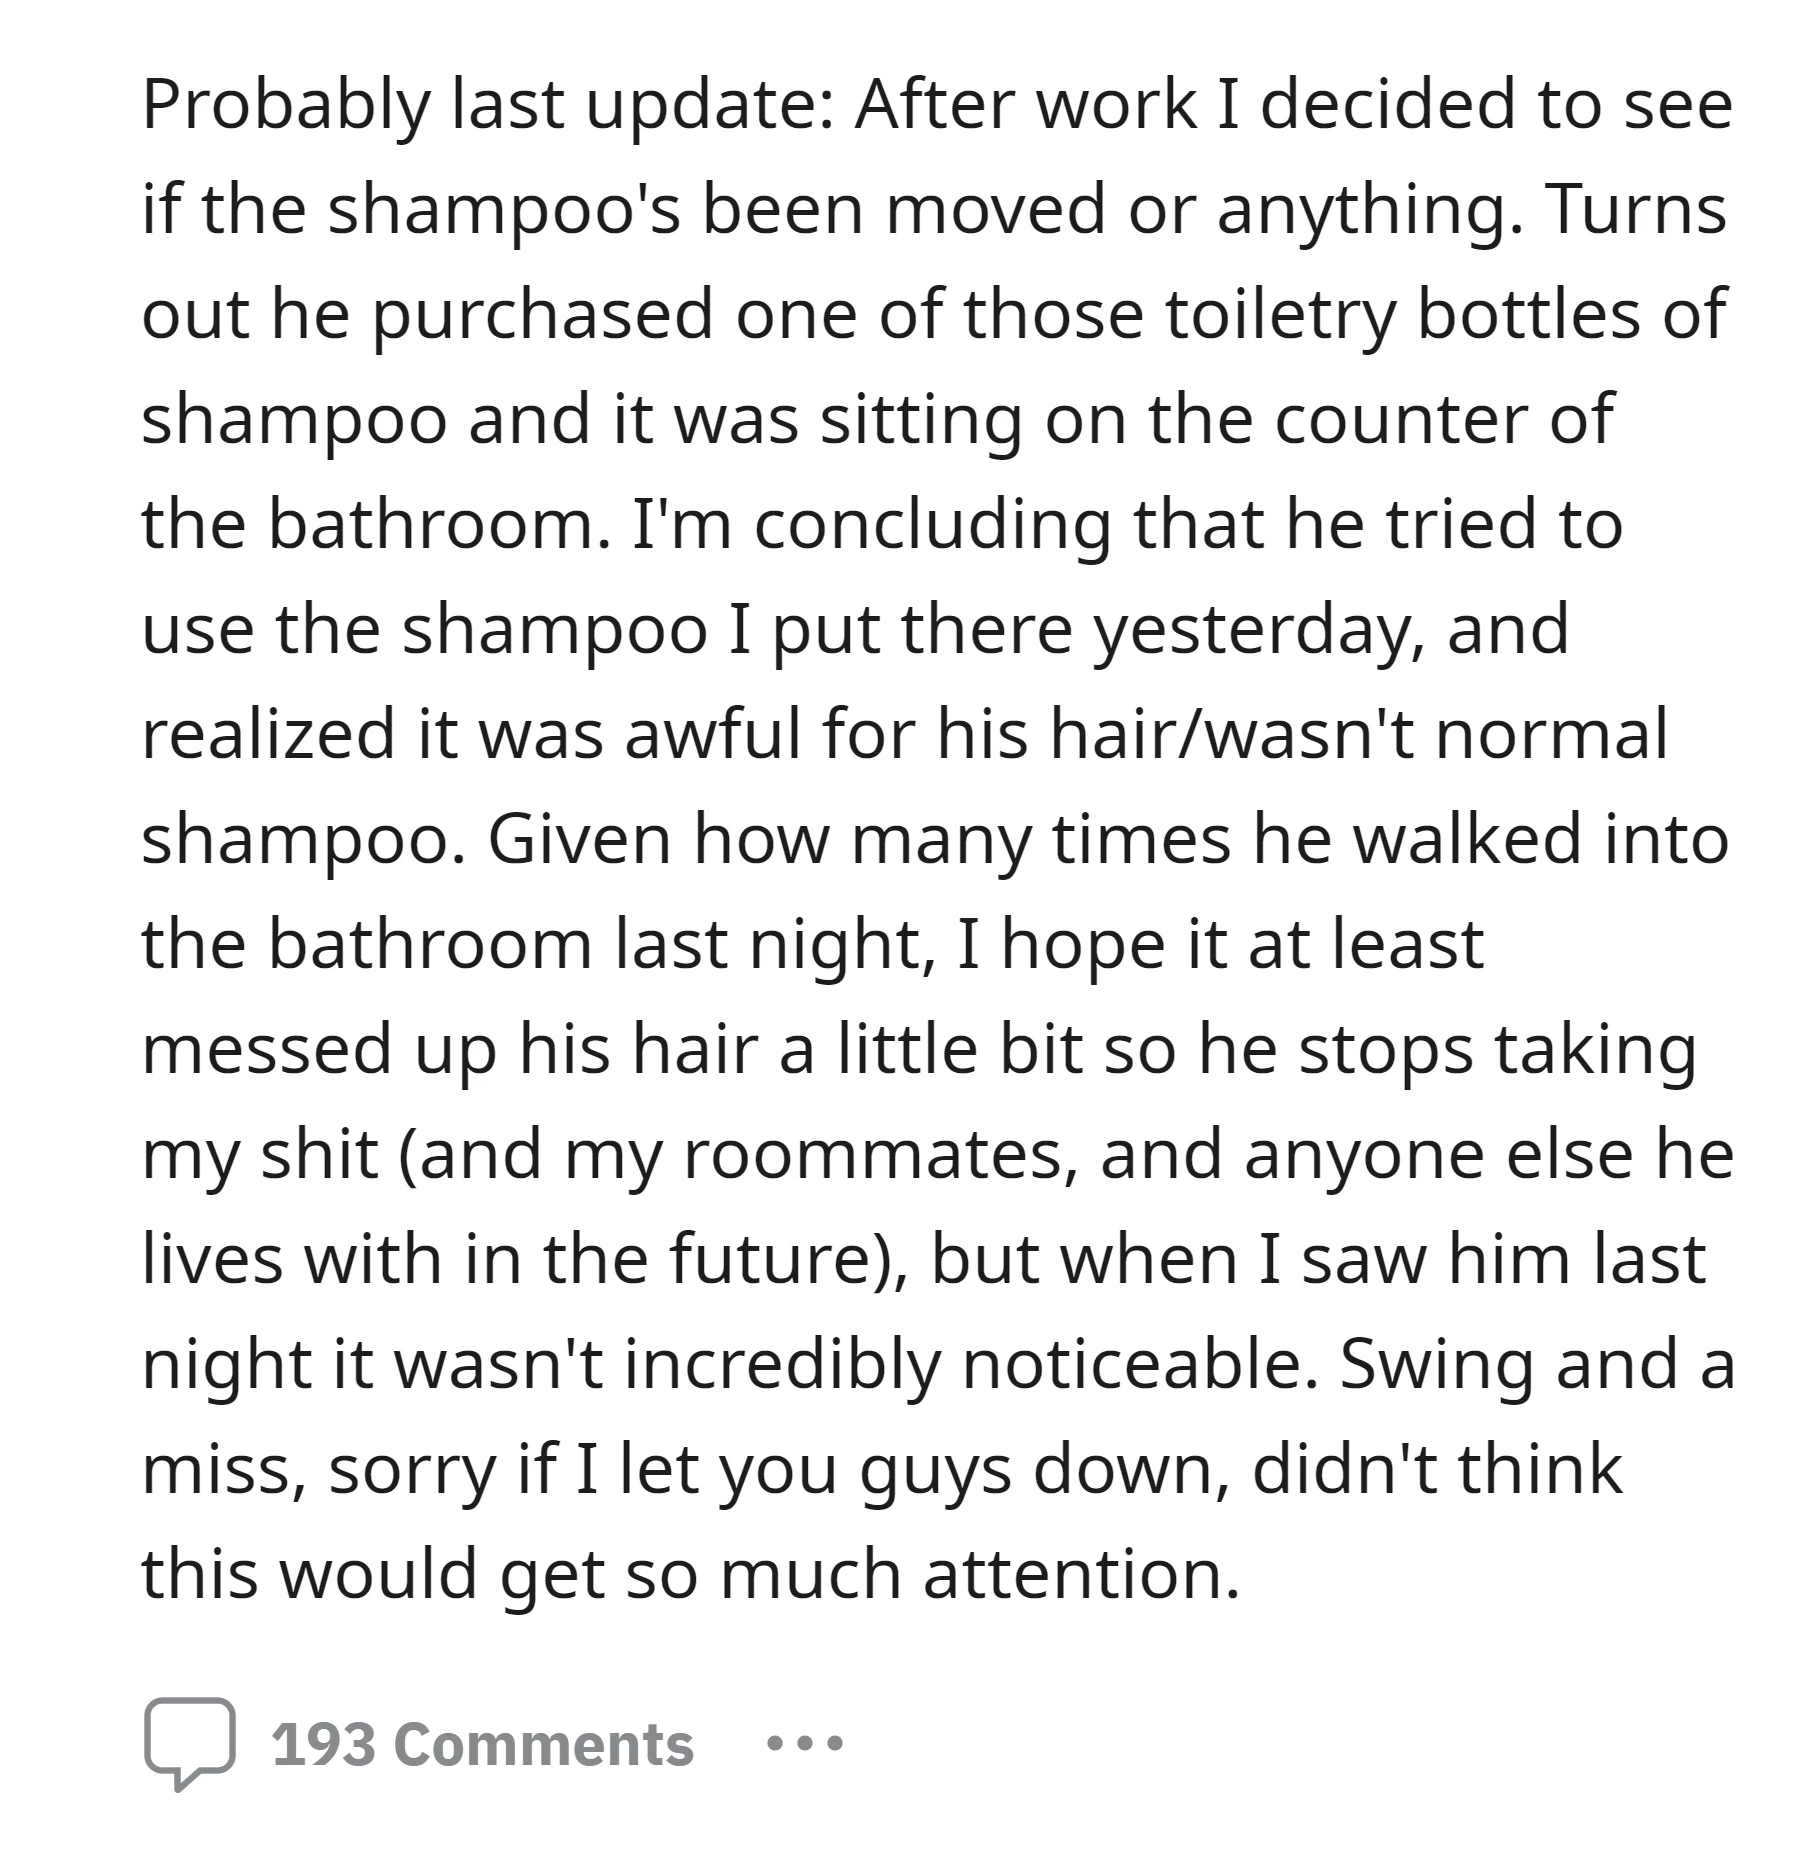 OP was dissapointed after finding that the roommate bought a new shampoo bottle